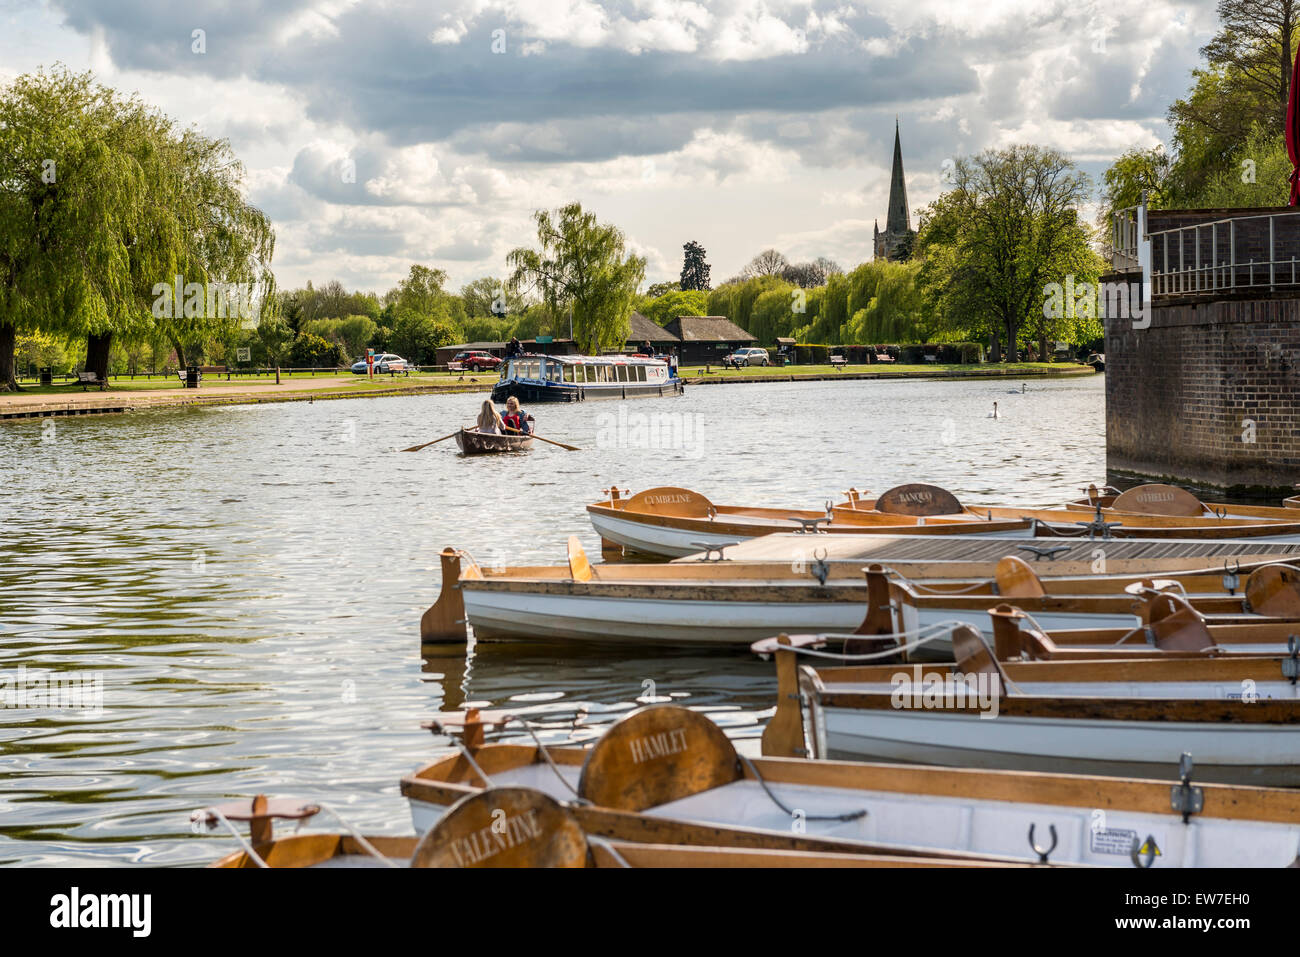 The River Avon in Stratford upon Avon is popular with tourists for River Cruises and pleasure boats Stock Photo